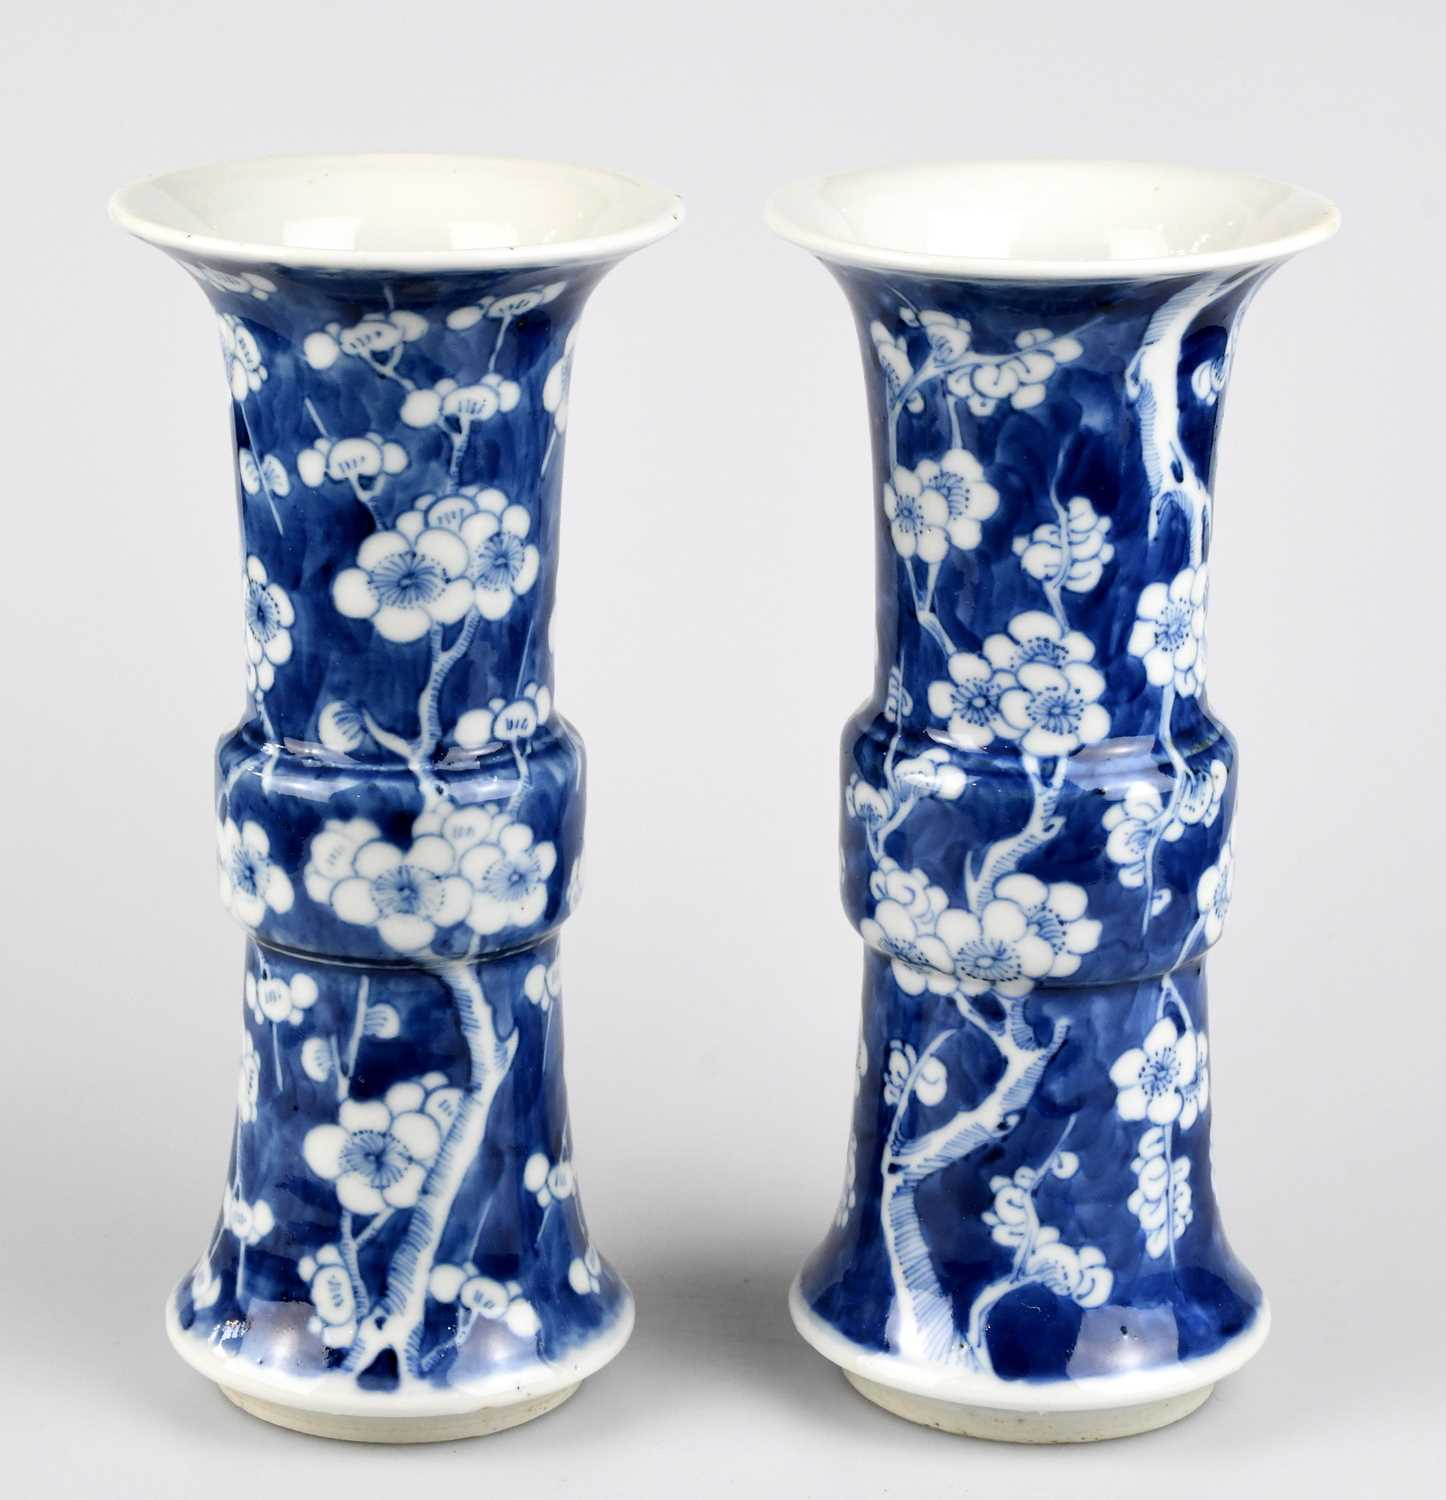 A pair of late 19th century Chinese blue and white porcelain Gu vases painted with prunus flowers on